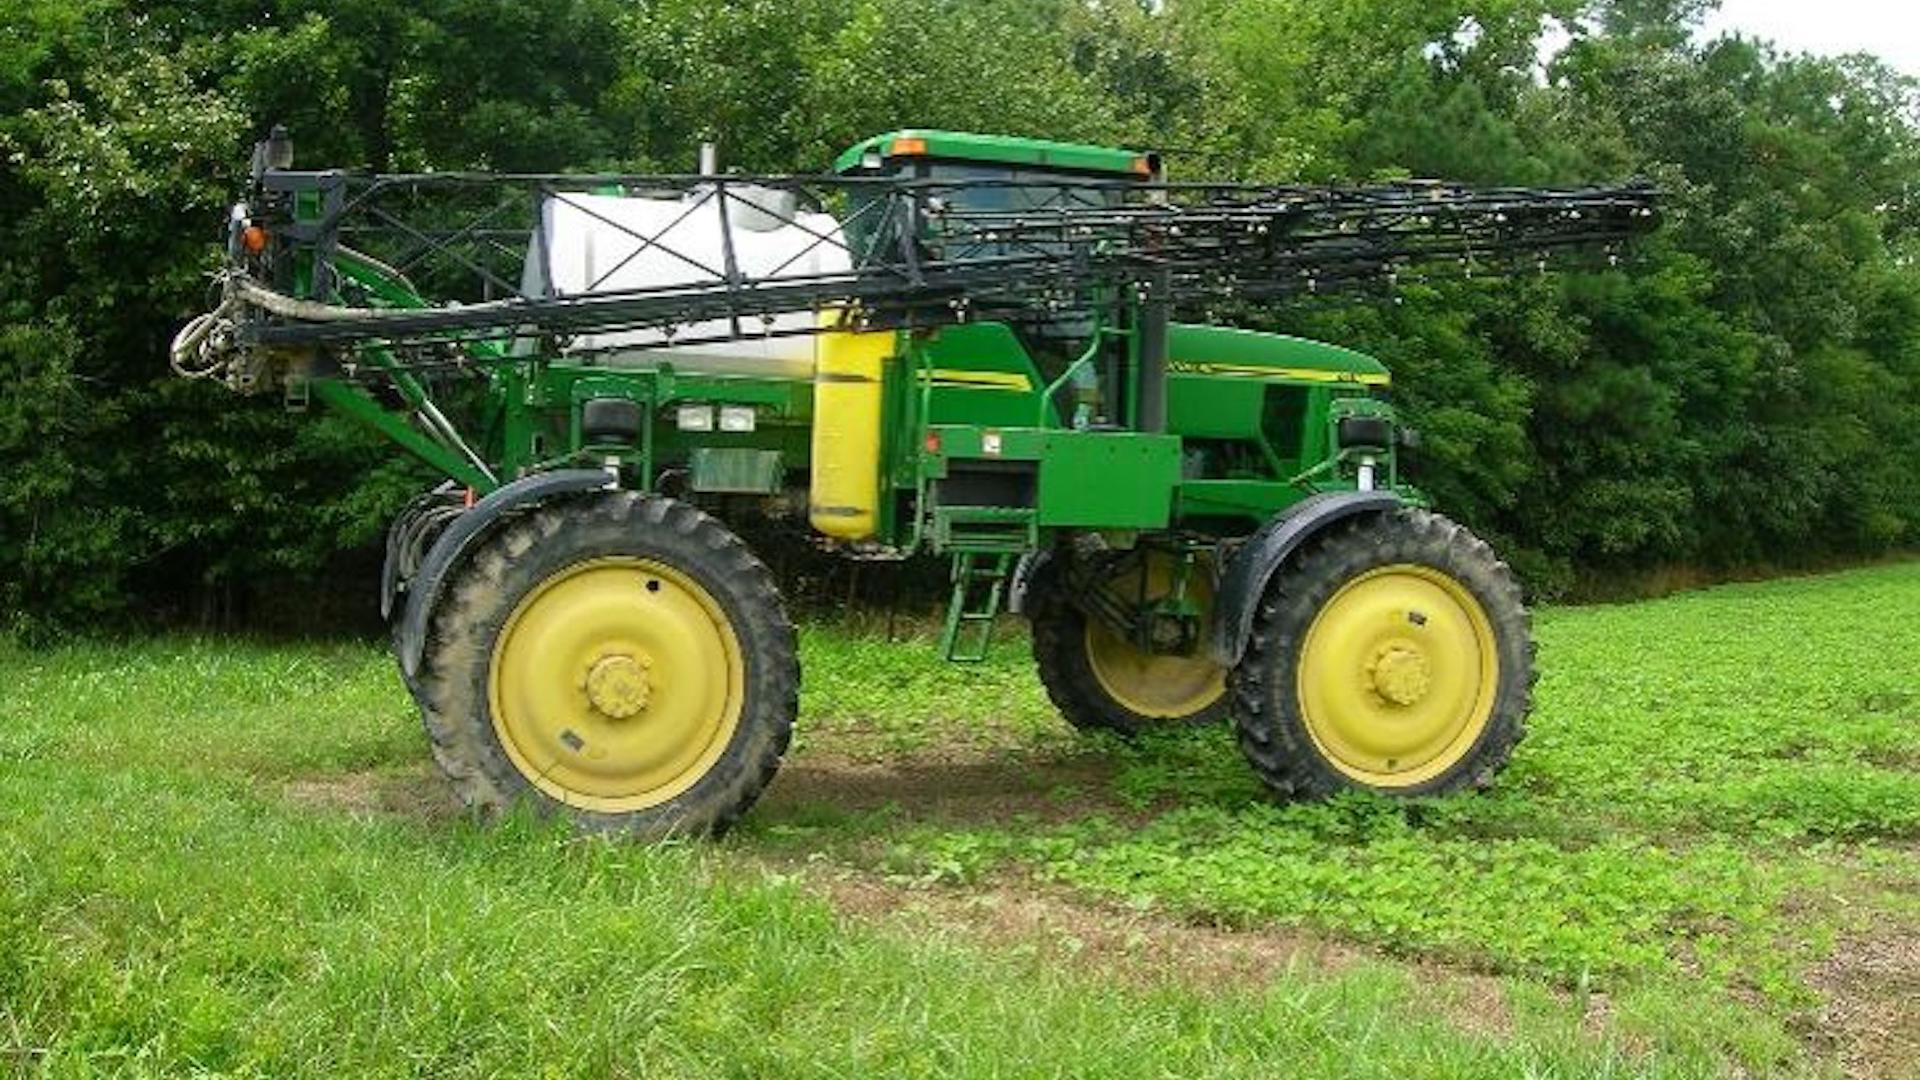 Picture of a tractor with pesticide applicator attachment